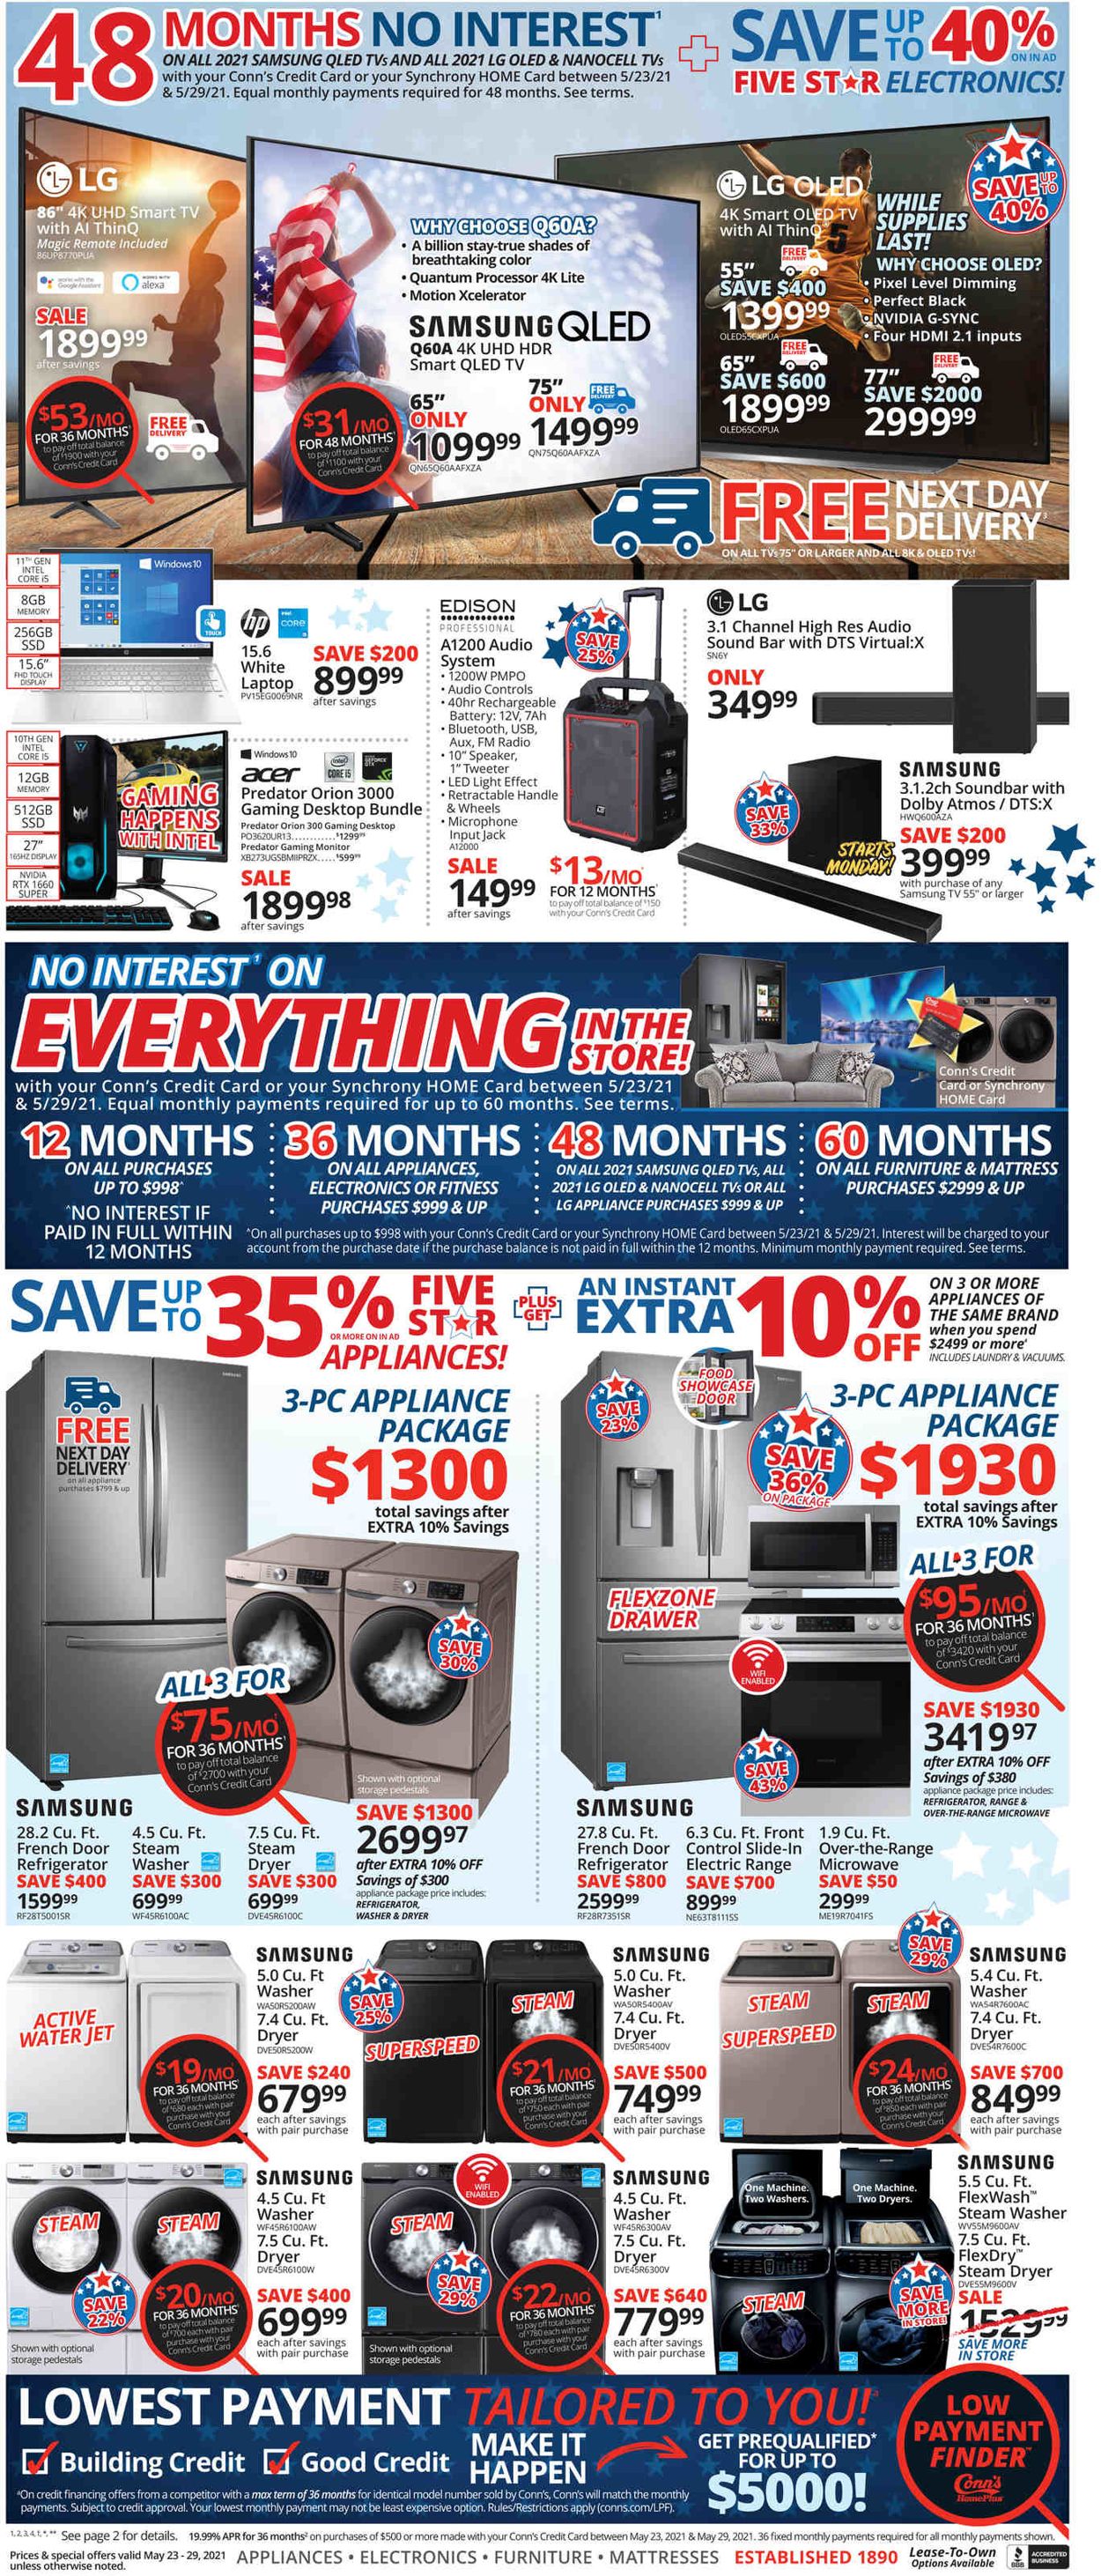 Conn's Home Plus Ad from 05/23/2021